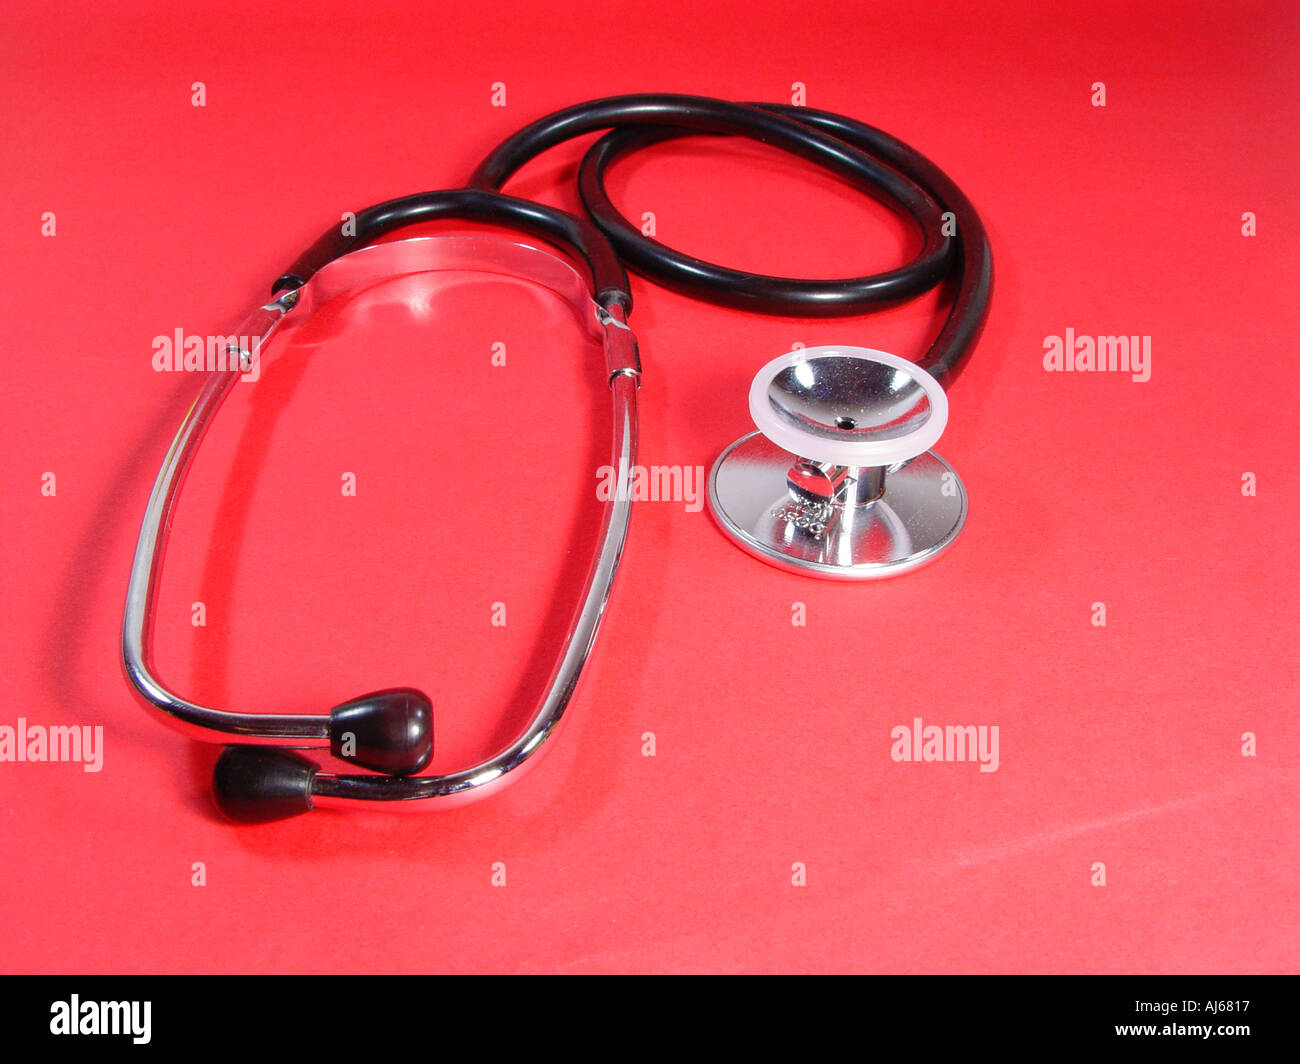 stethoscope is standard for doctors and symbol for physicians and the medical profession Stock Photo